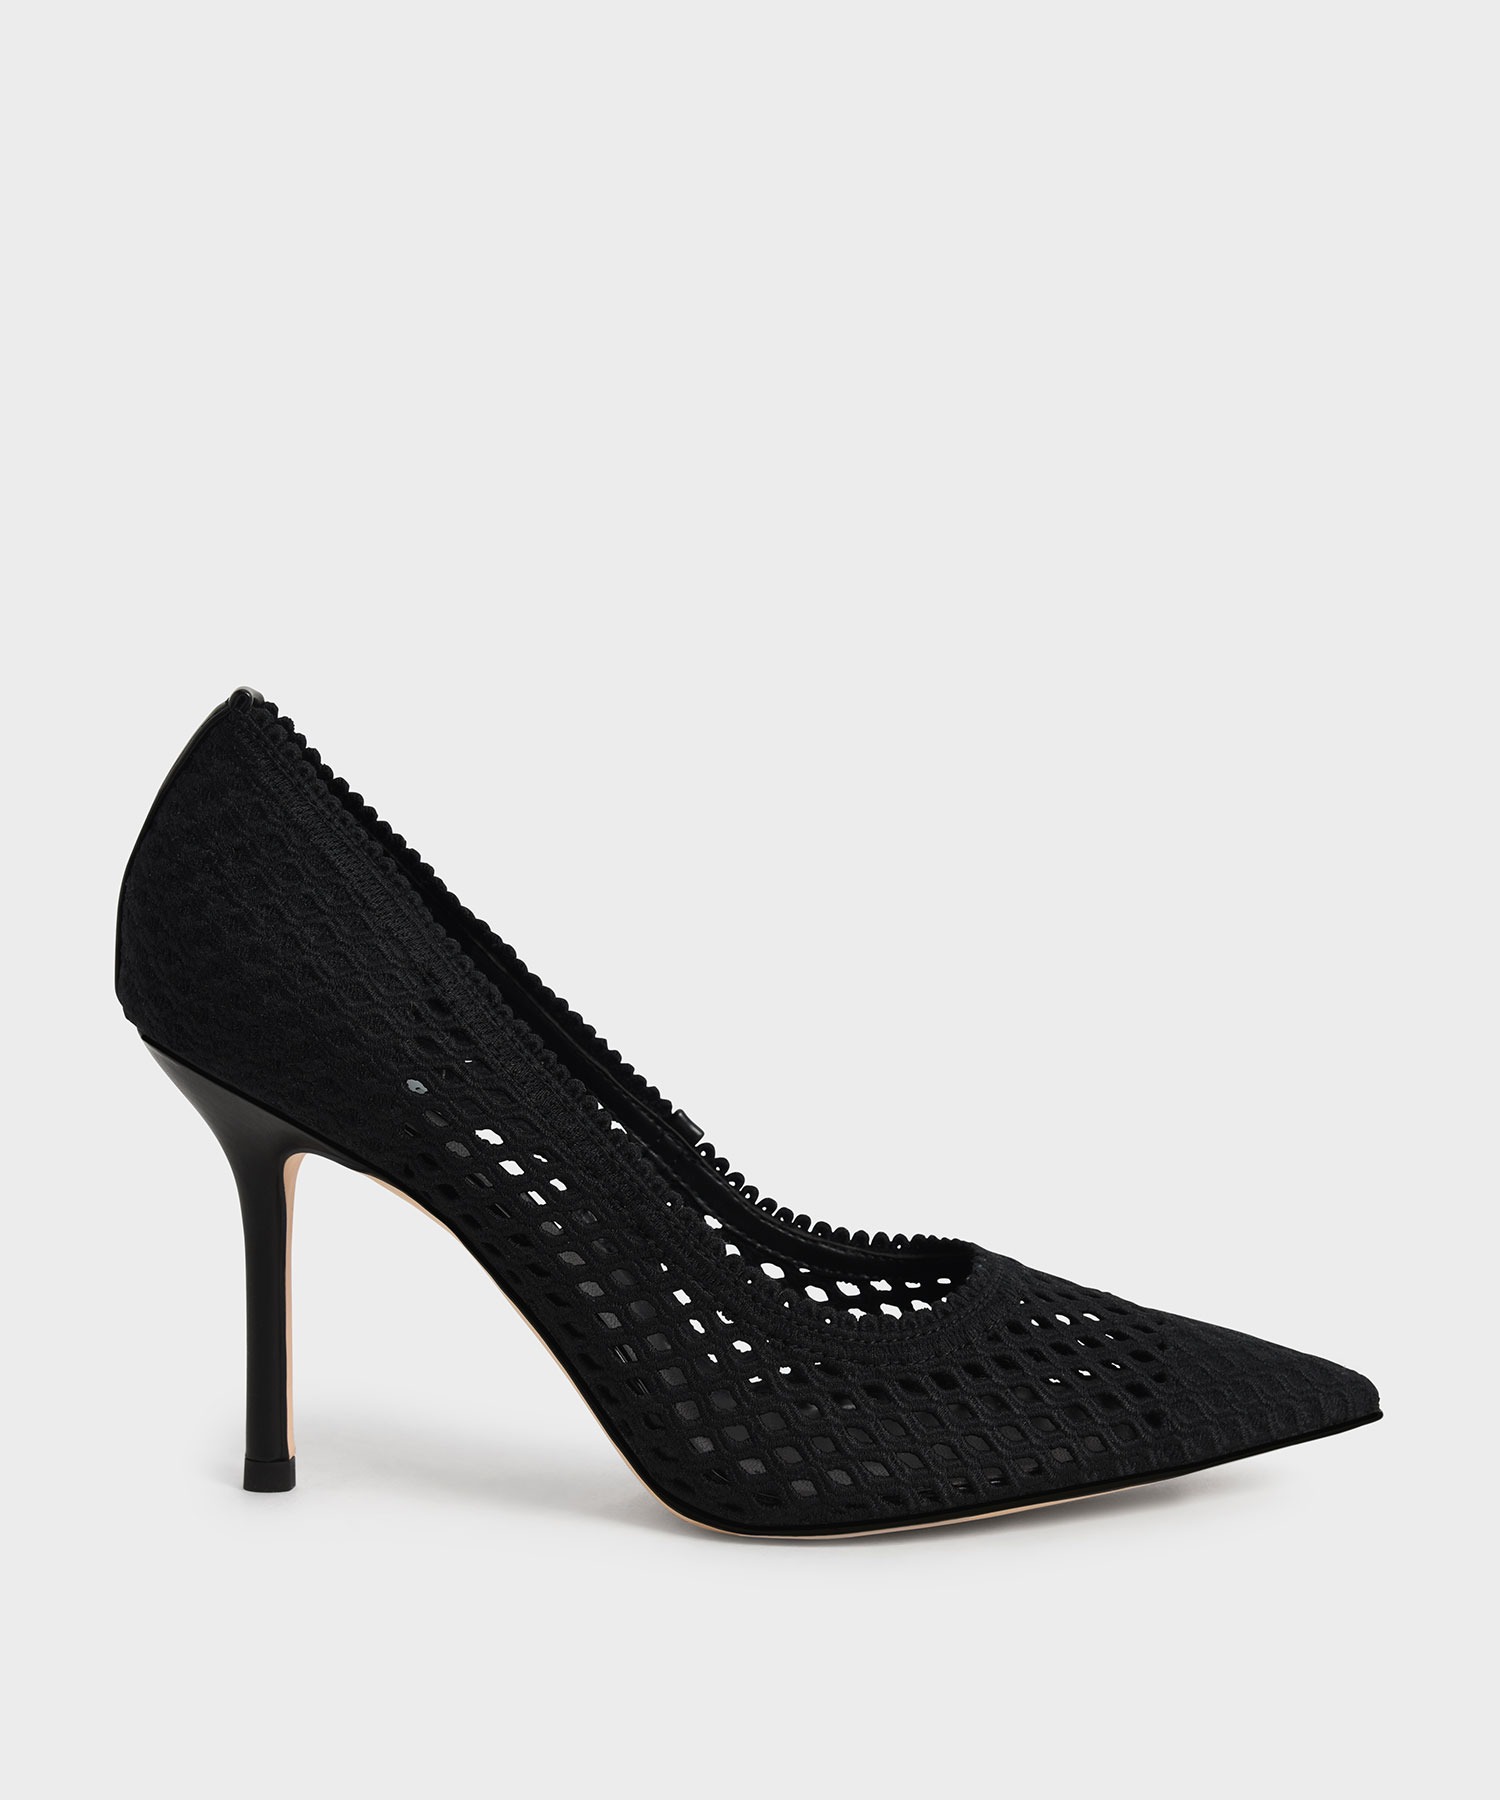 CHARLES KEITHニット スティレットパンプス Stiletto SALE ラッピング無料 74%OFF Knitted Pumps